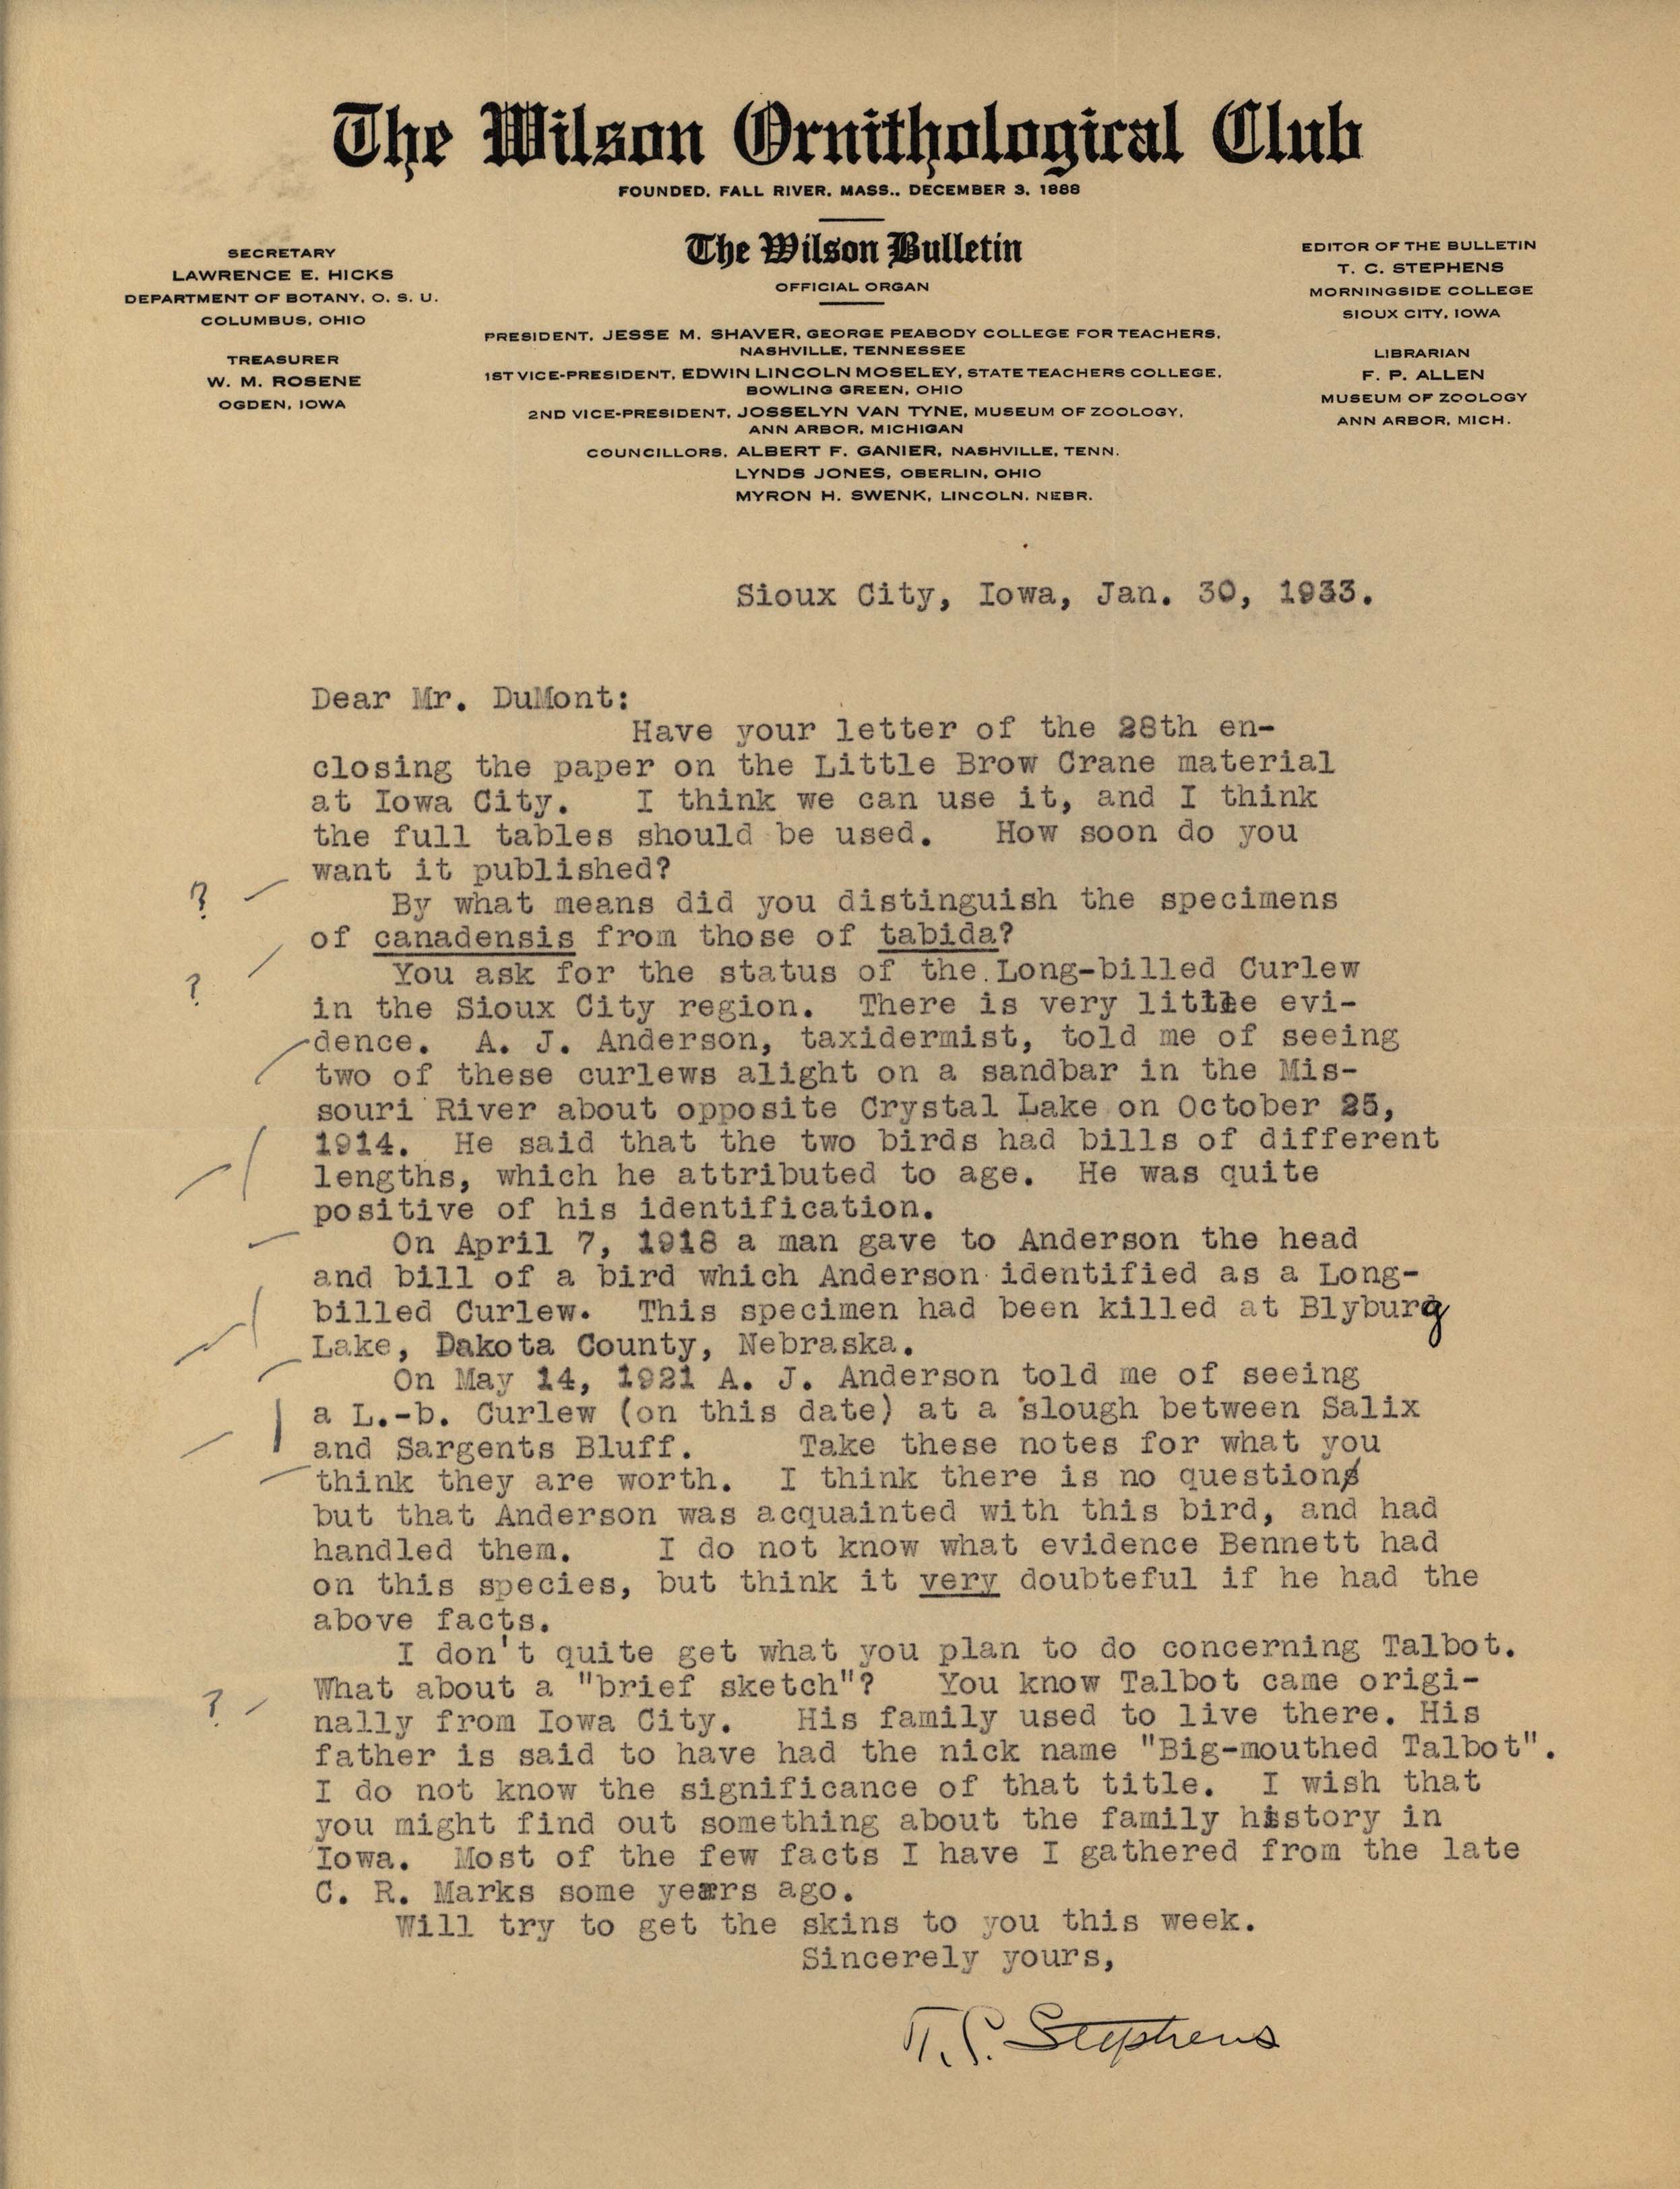 Thomas Stephens letter to Philip DuMont regarding the status of the Long-billed Curlew in the Sioux City region, January 30, 1933